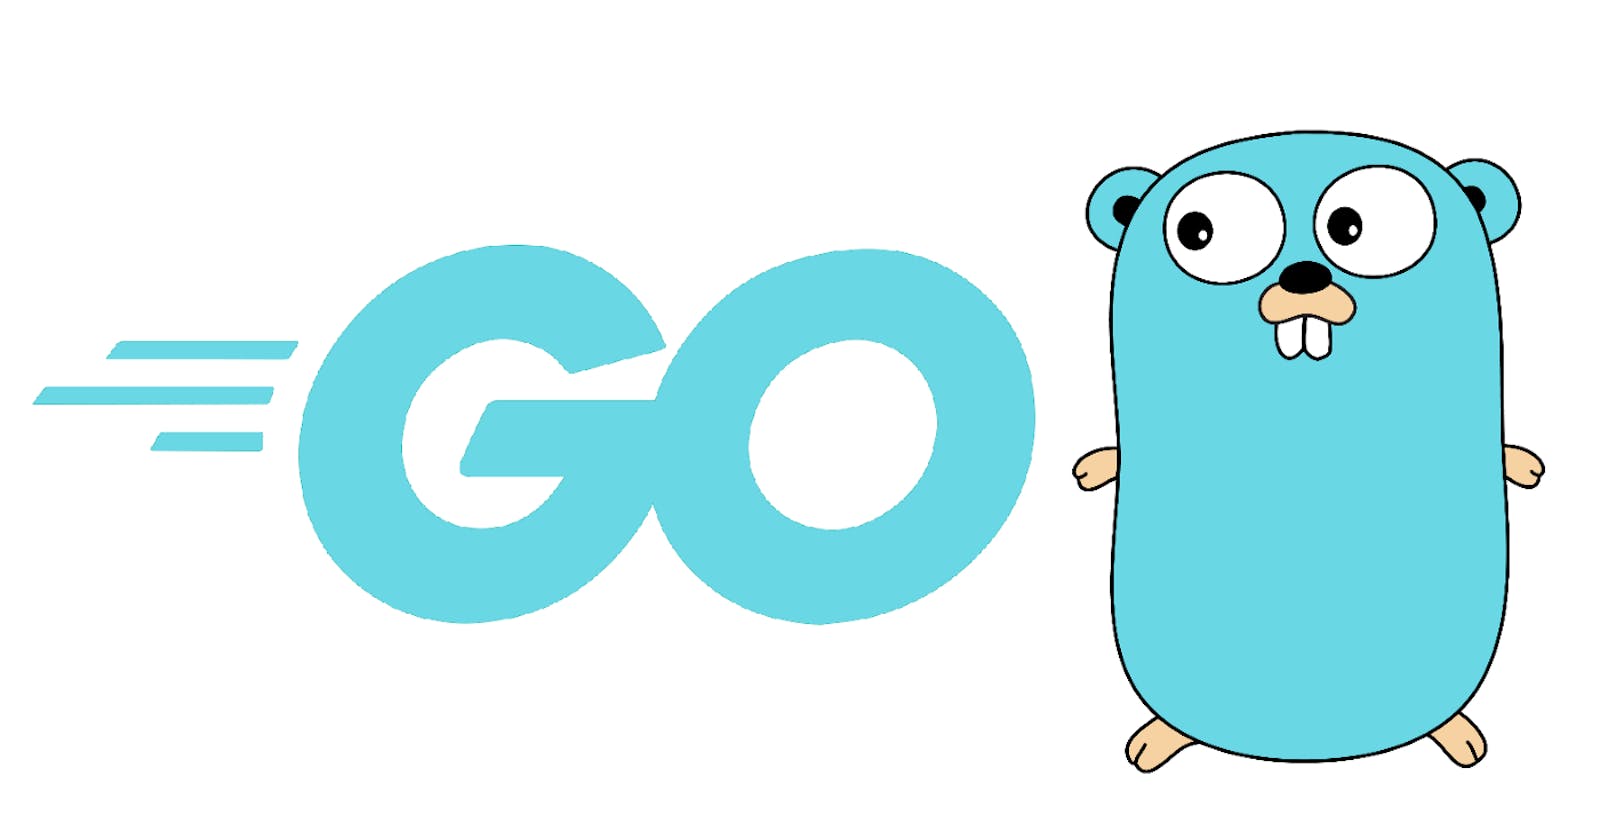 Building an API Rate limiter using Go